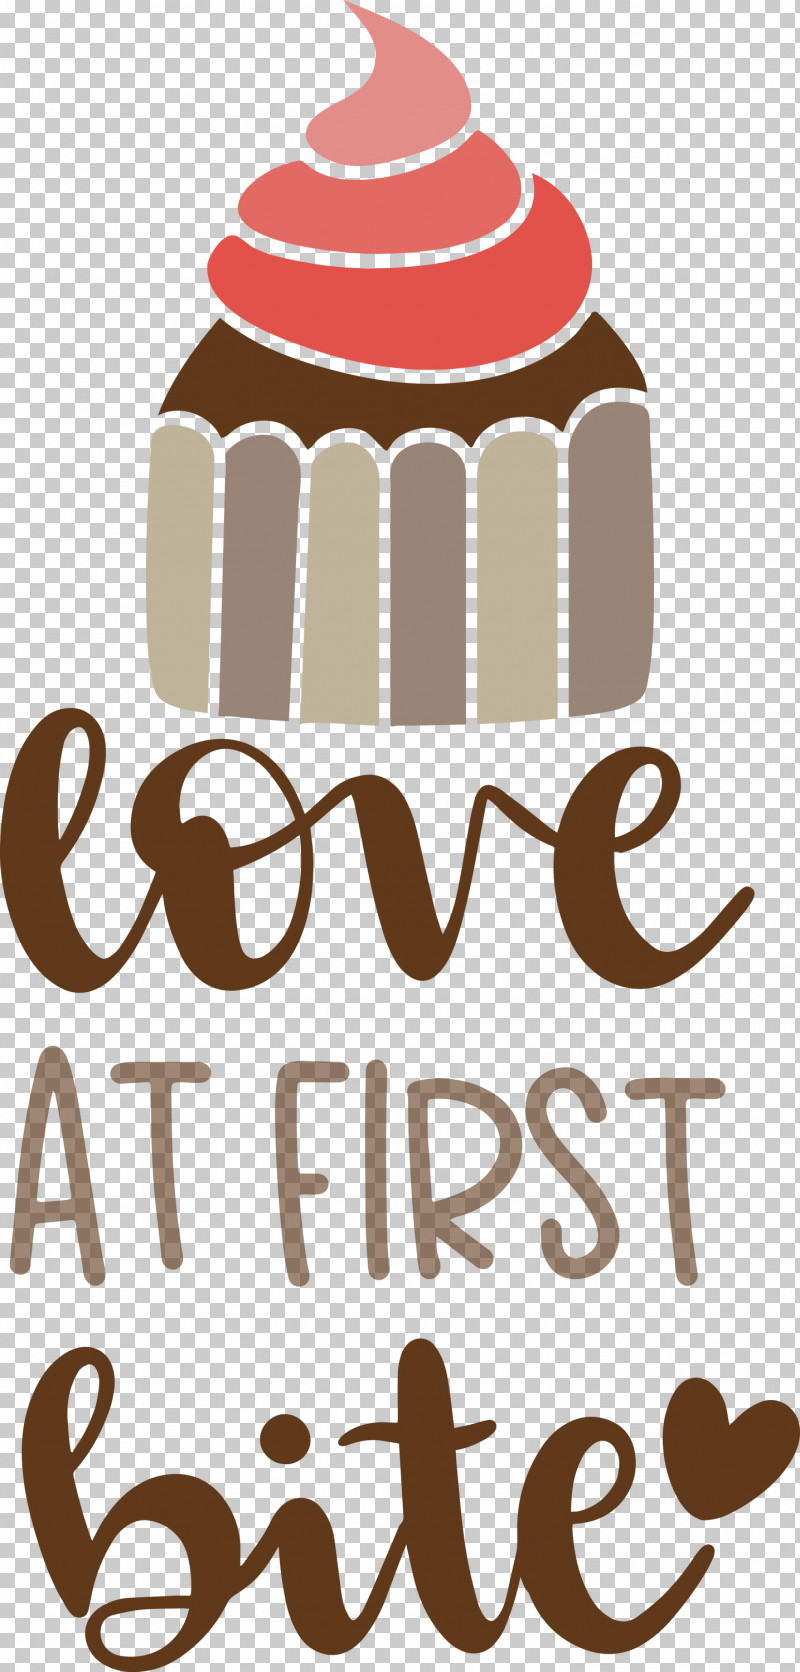 Love At First Bite Cooking Kitchen PNG, Clipart, Cooking, Cupcake, Food, Kitchen, Logo Free PNG Download